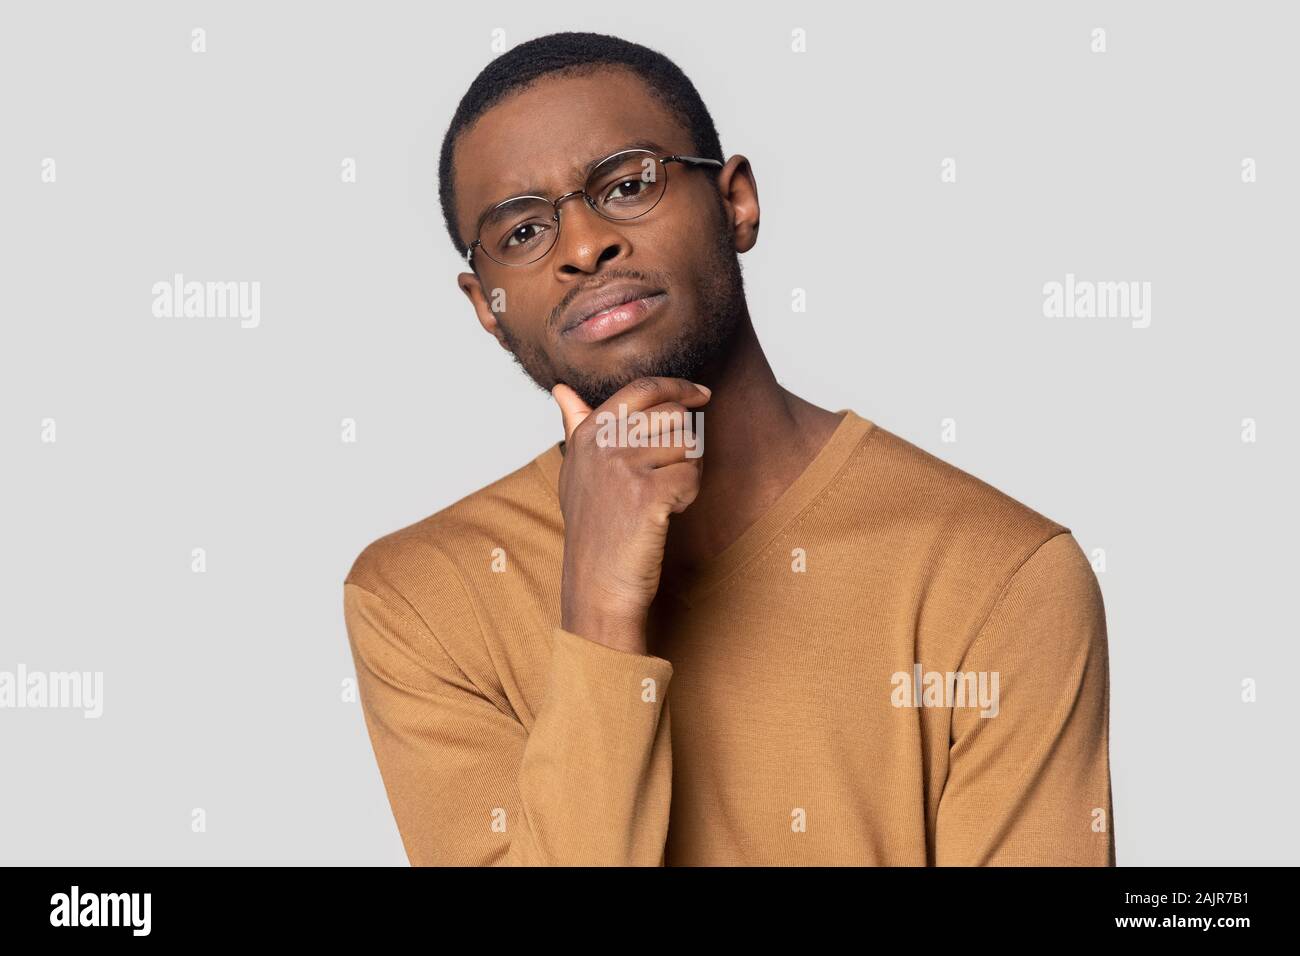 Concerned doubting african guy looking at camera studio shot Stock Photo